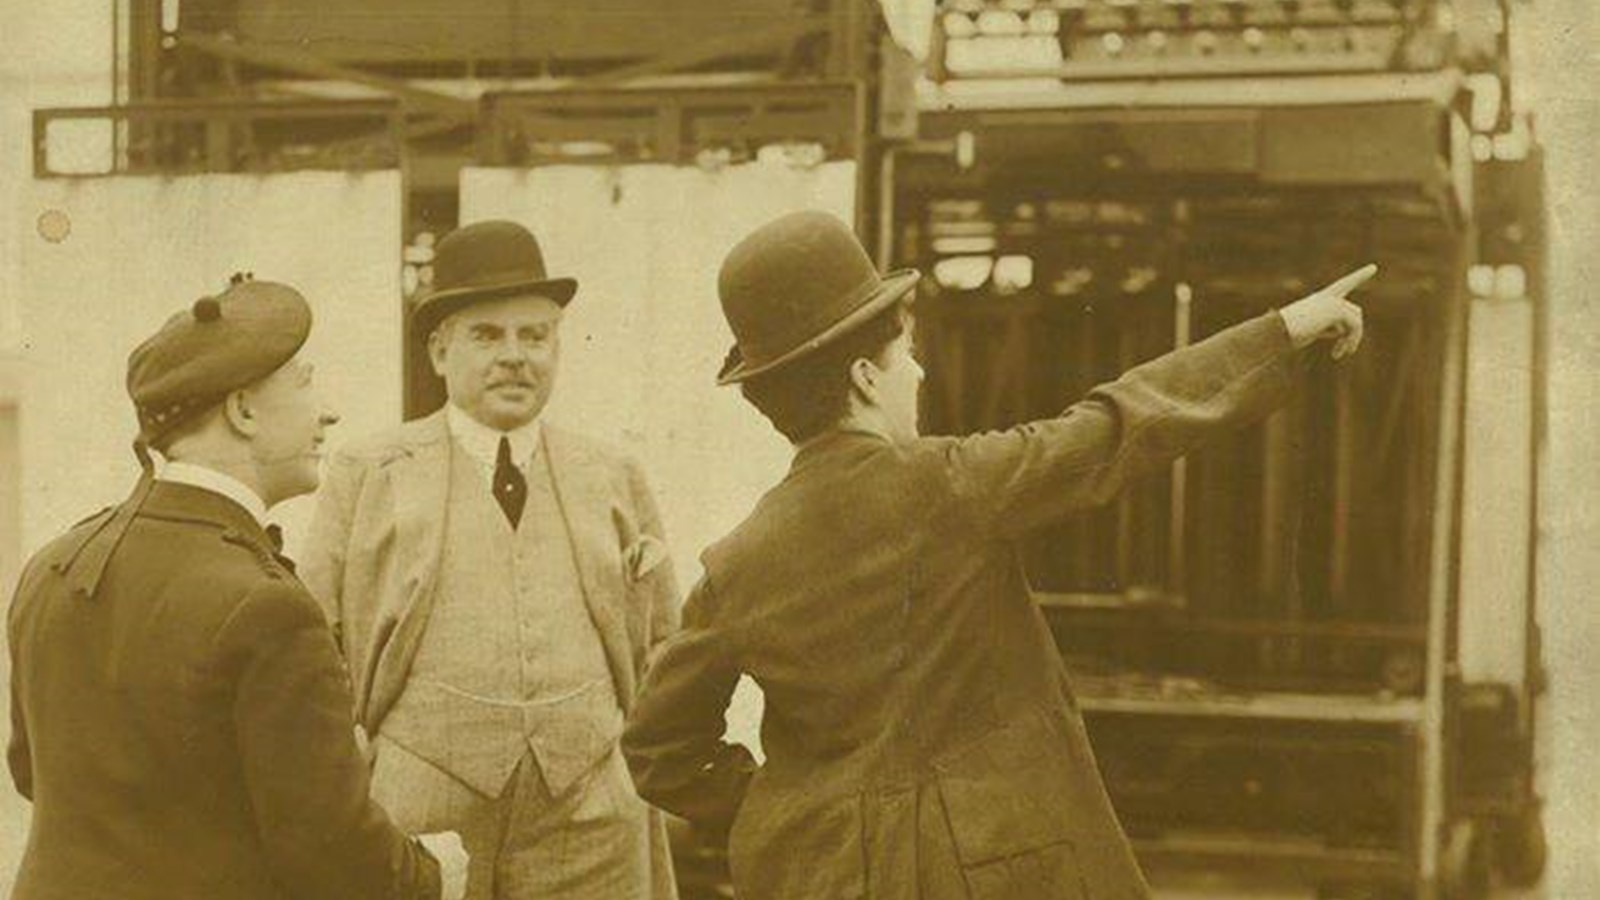 A black and white photograph of three people, including Harry Lauder and Charlie Chaplin in a warehouse, all wearing hats and one pointing to something in the distance.